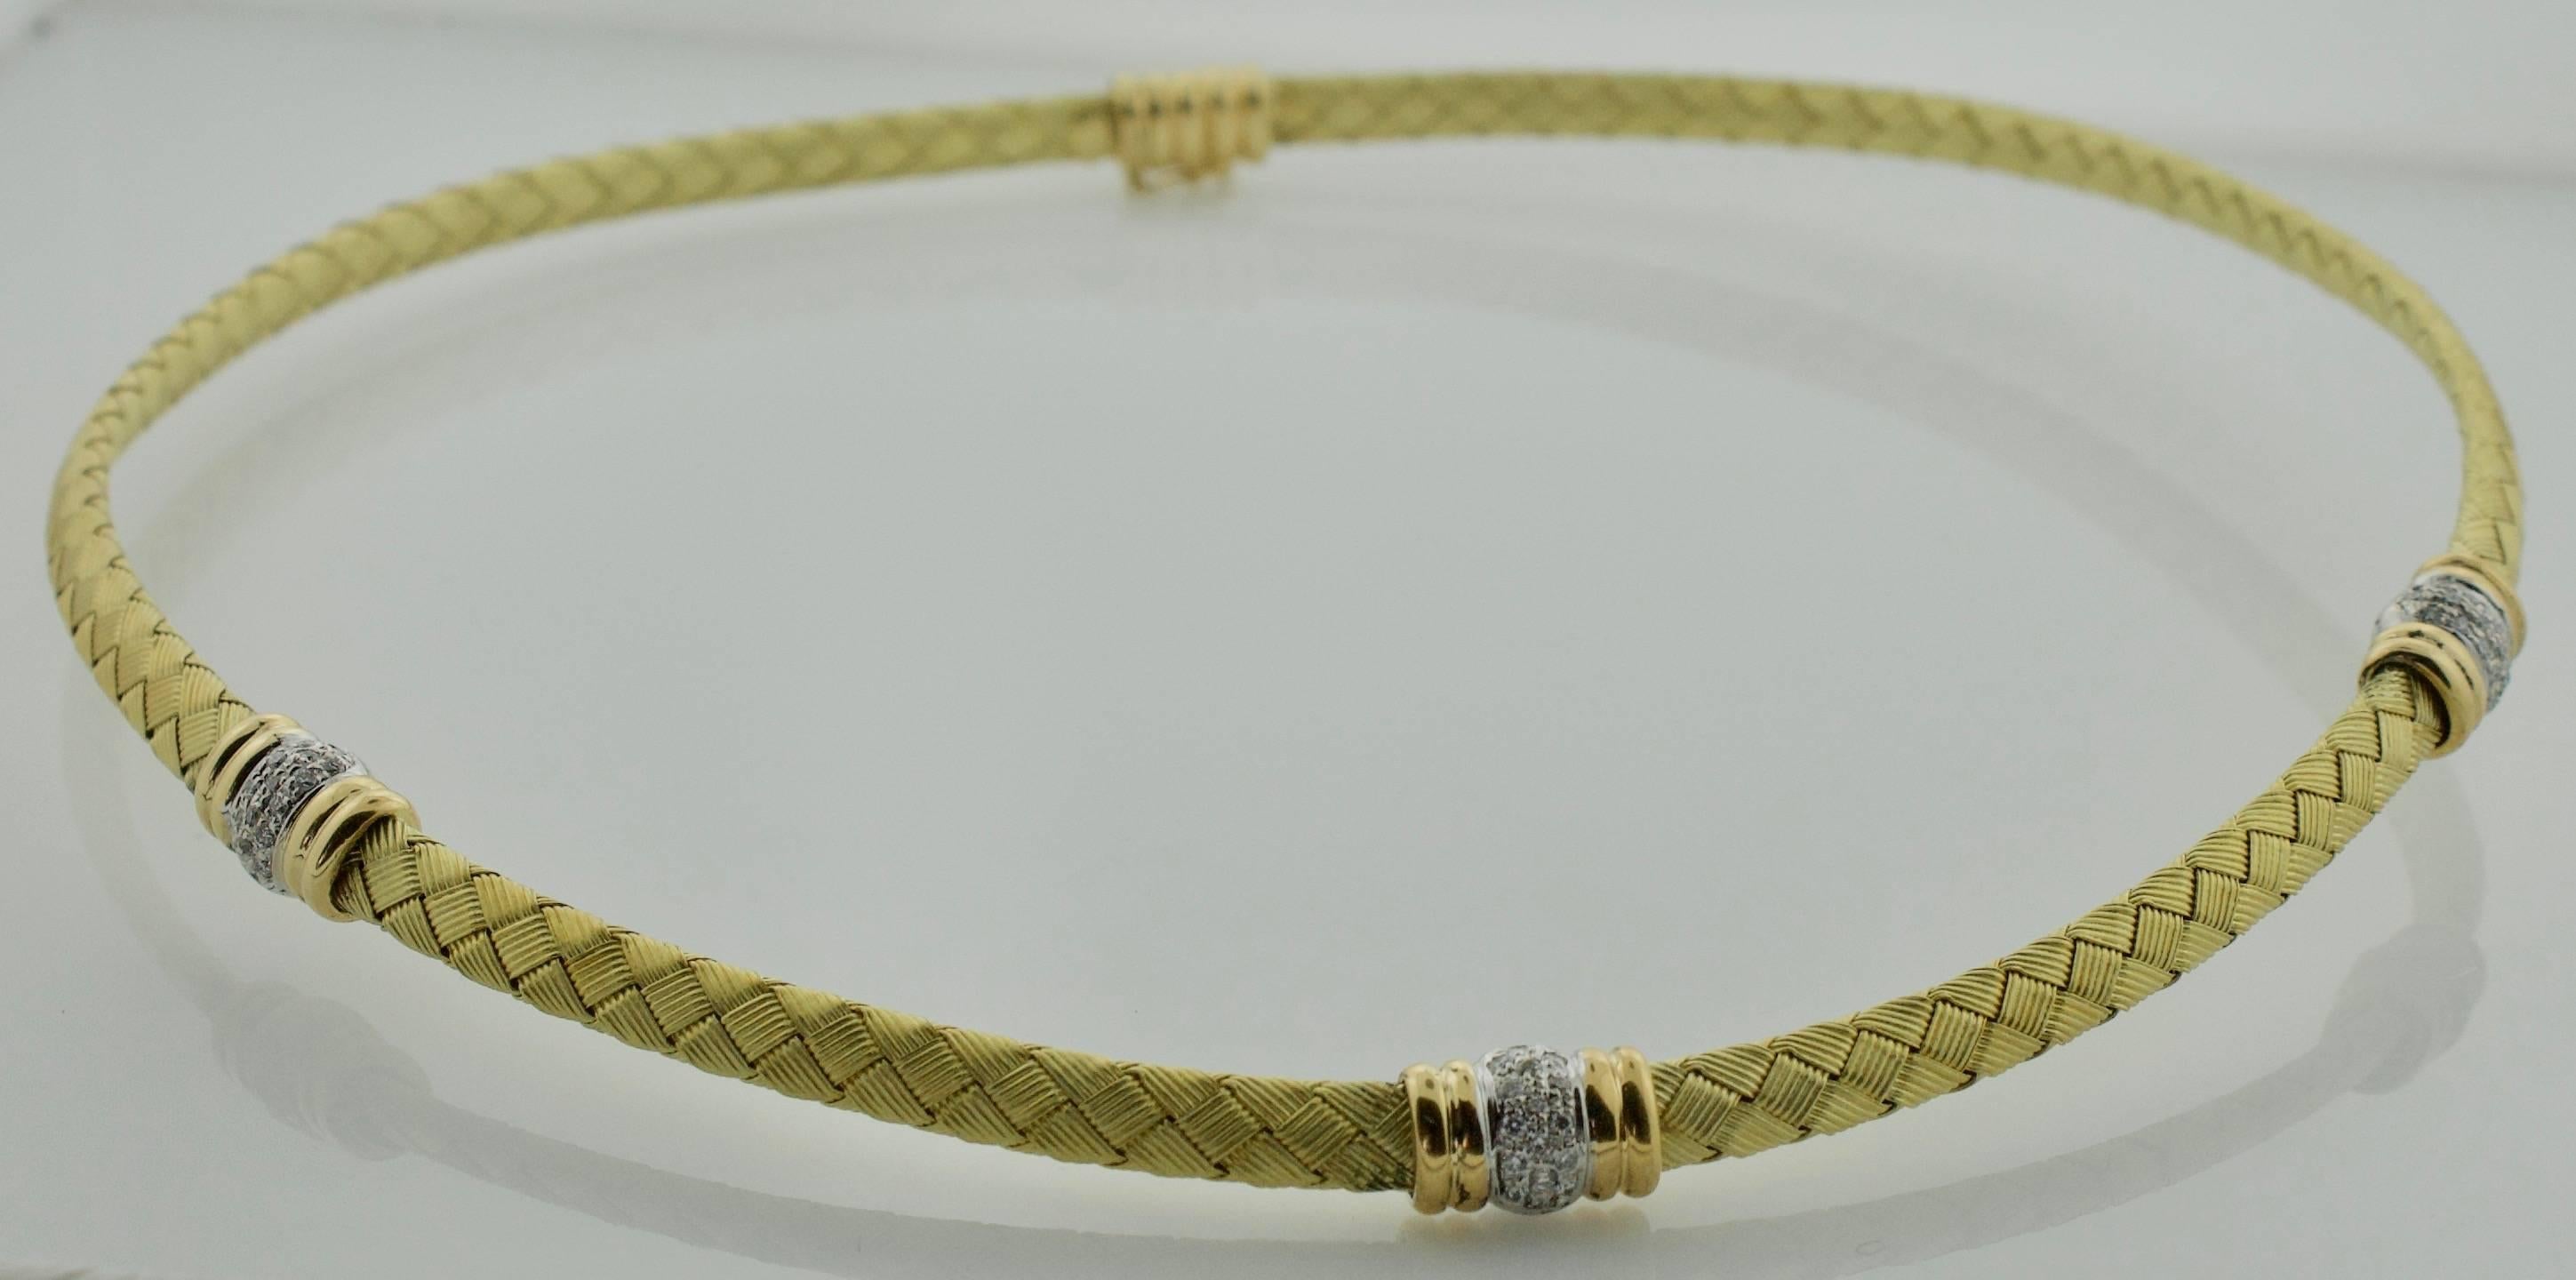 Diamond Collar in 18k Yellow Gold
Woven an flexible
Forty Eight Round Brilliant Cut Diamonds weighing .50 carats approximately [GH VVS-VS]
Very Fine Quality. In Perfect Condition

